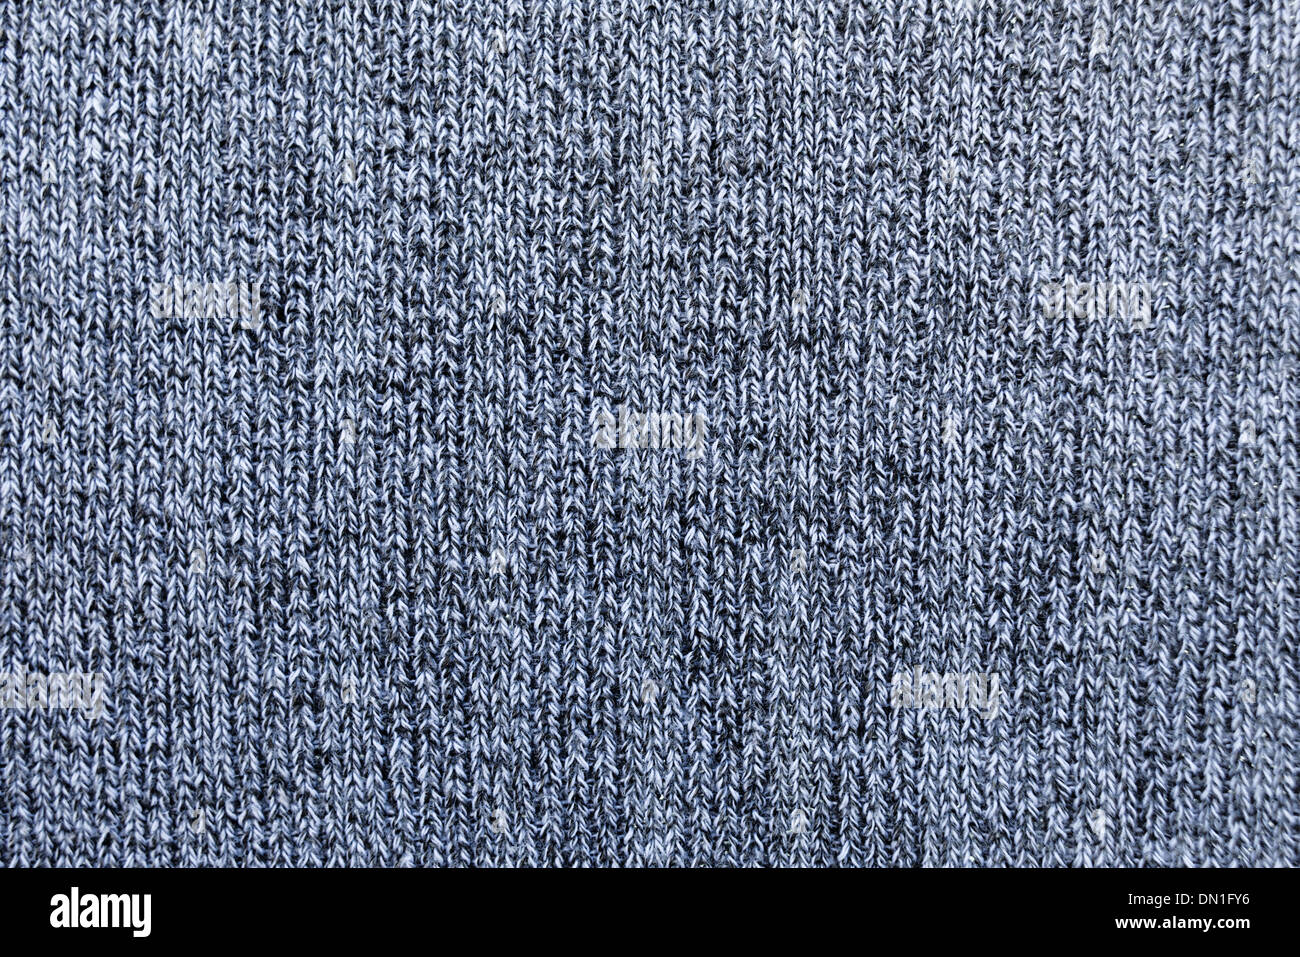 Fine fabric texture as background for your design. Stock Photo